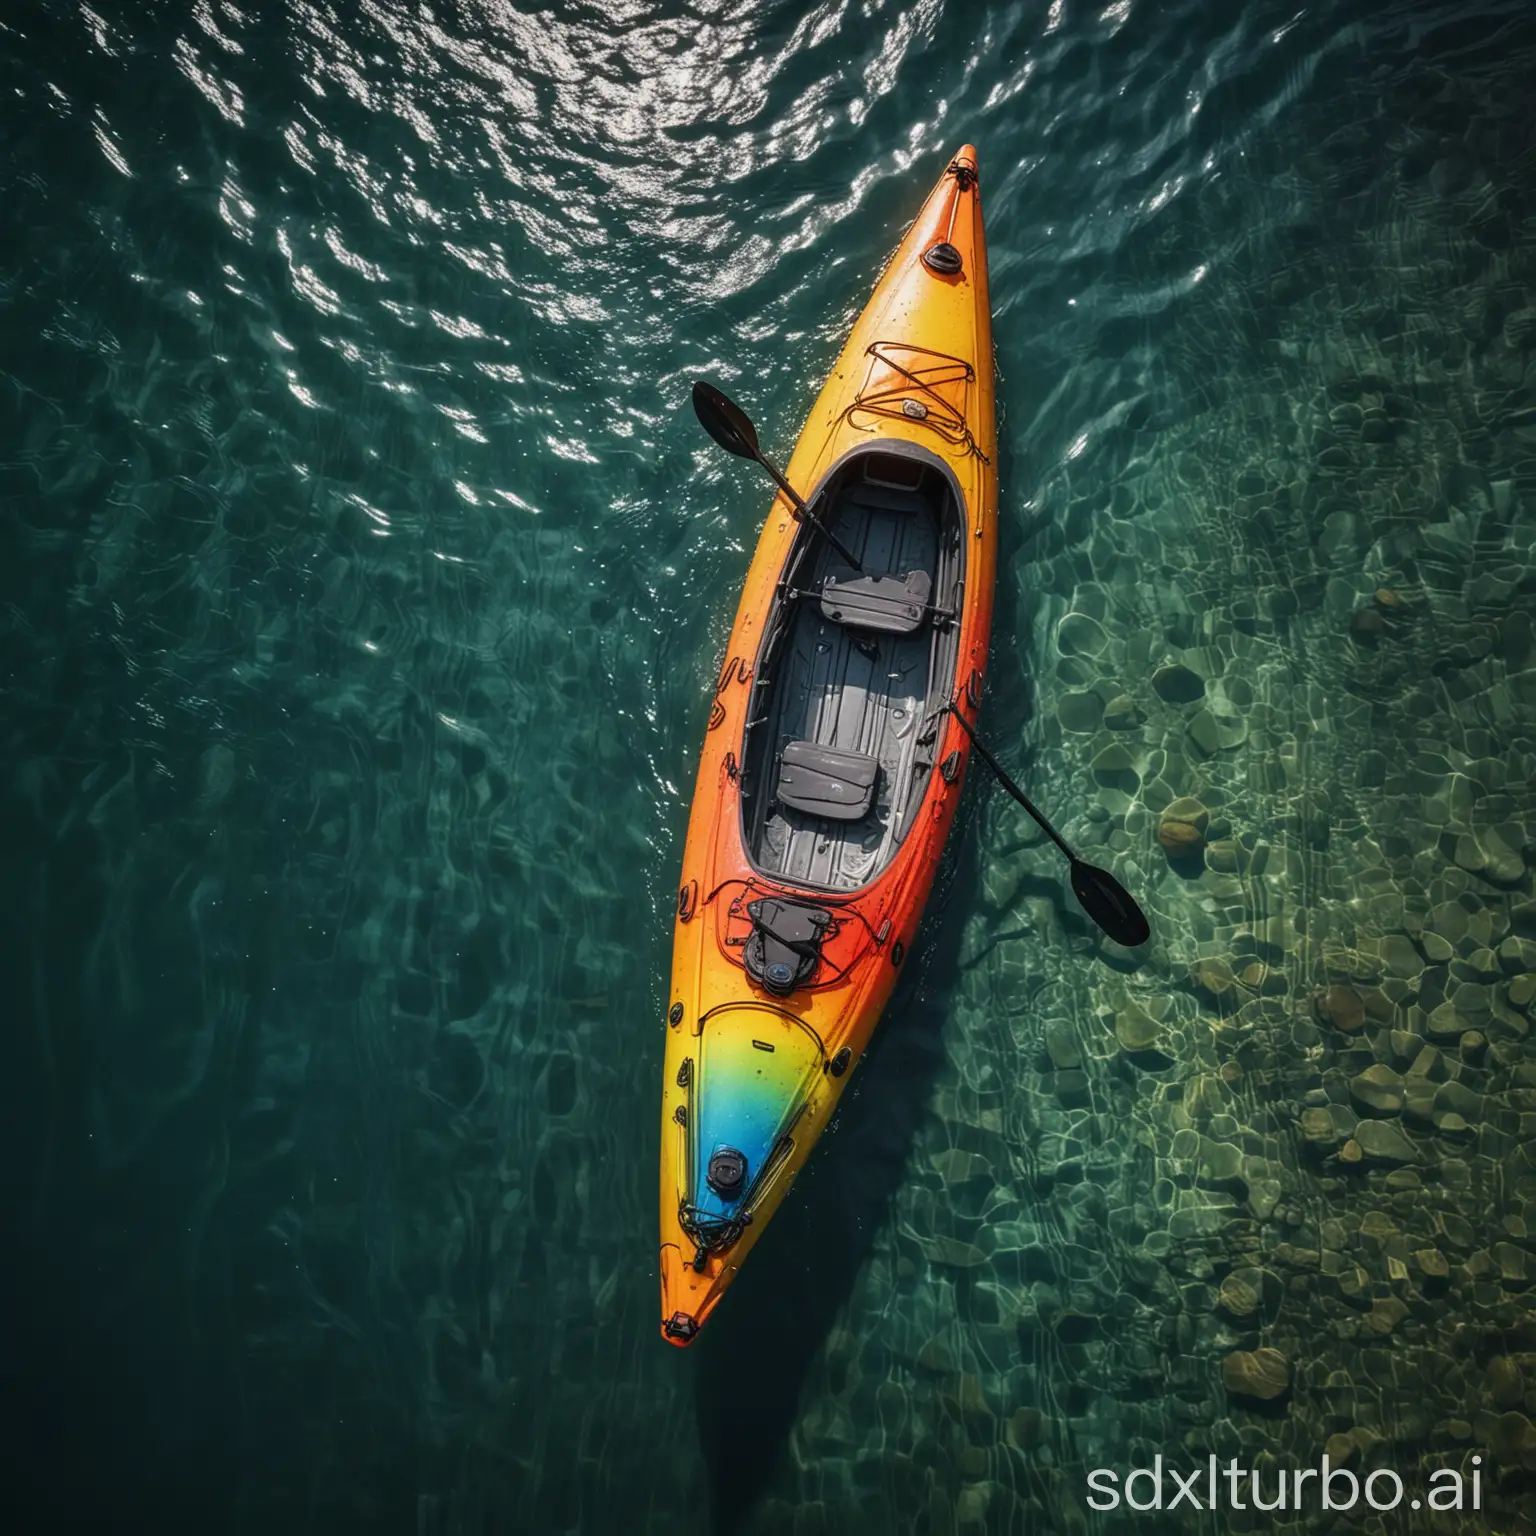 a kayak in the water, in the style of optical color mixing, aerial view, rainbowcore, national geographic photo, 8k resolution, crayon art, interactive artwork